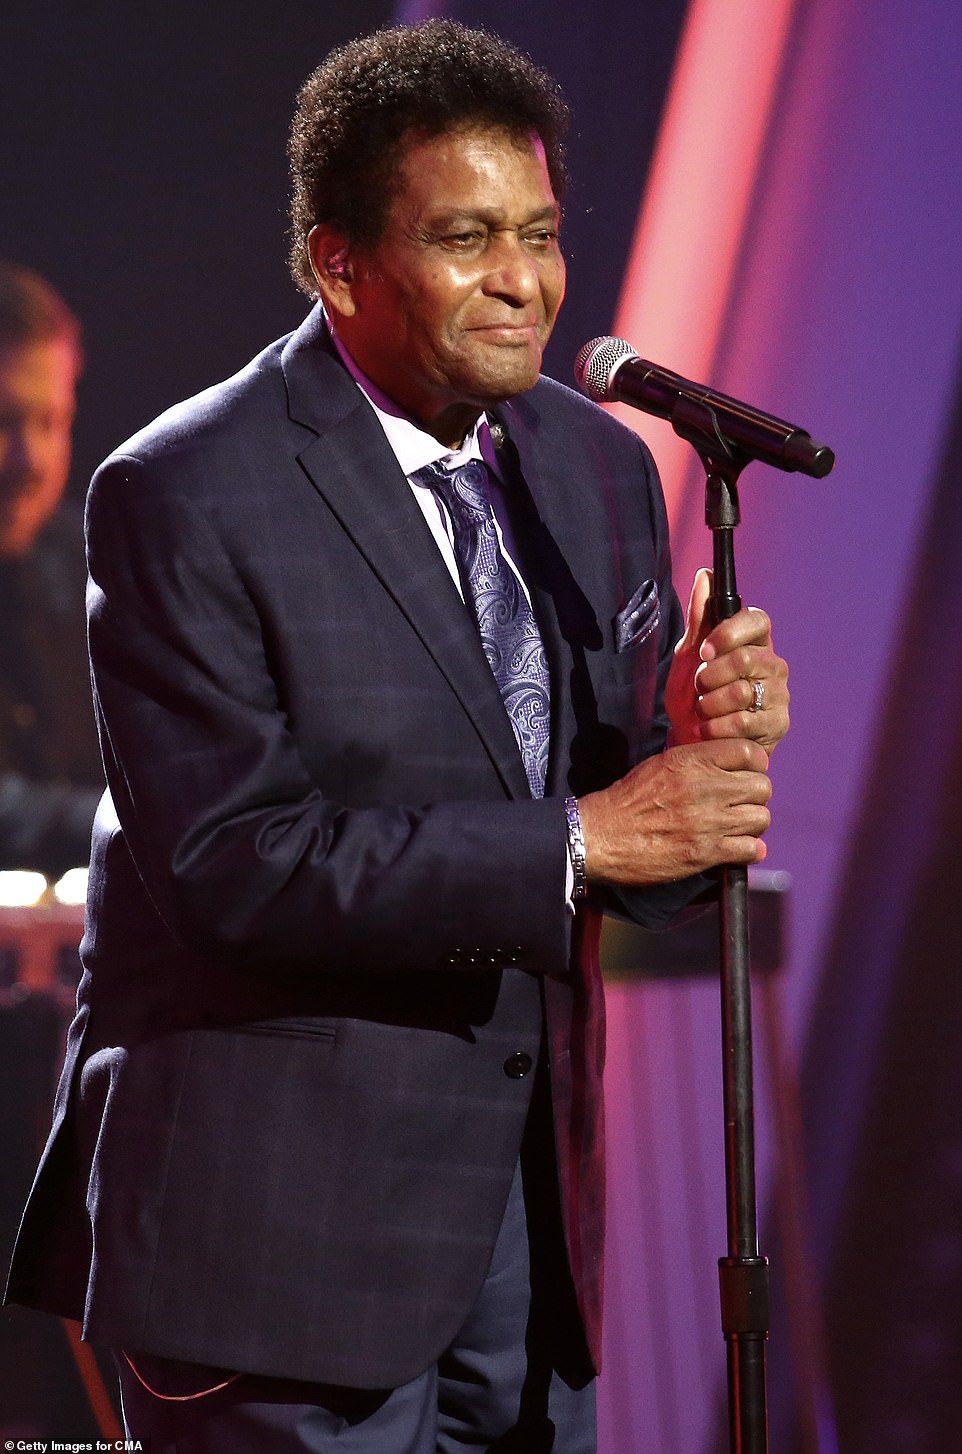 Lifetime Achievement: This year's Willie Nelson Lifetime Achievement Award was presented by Jimmie Allen to country legend Charley Pride, whose hits include Mountain of Love and Roll On Mississippi